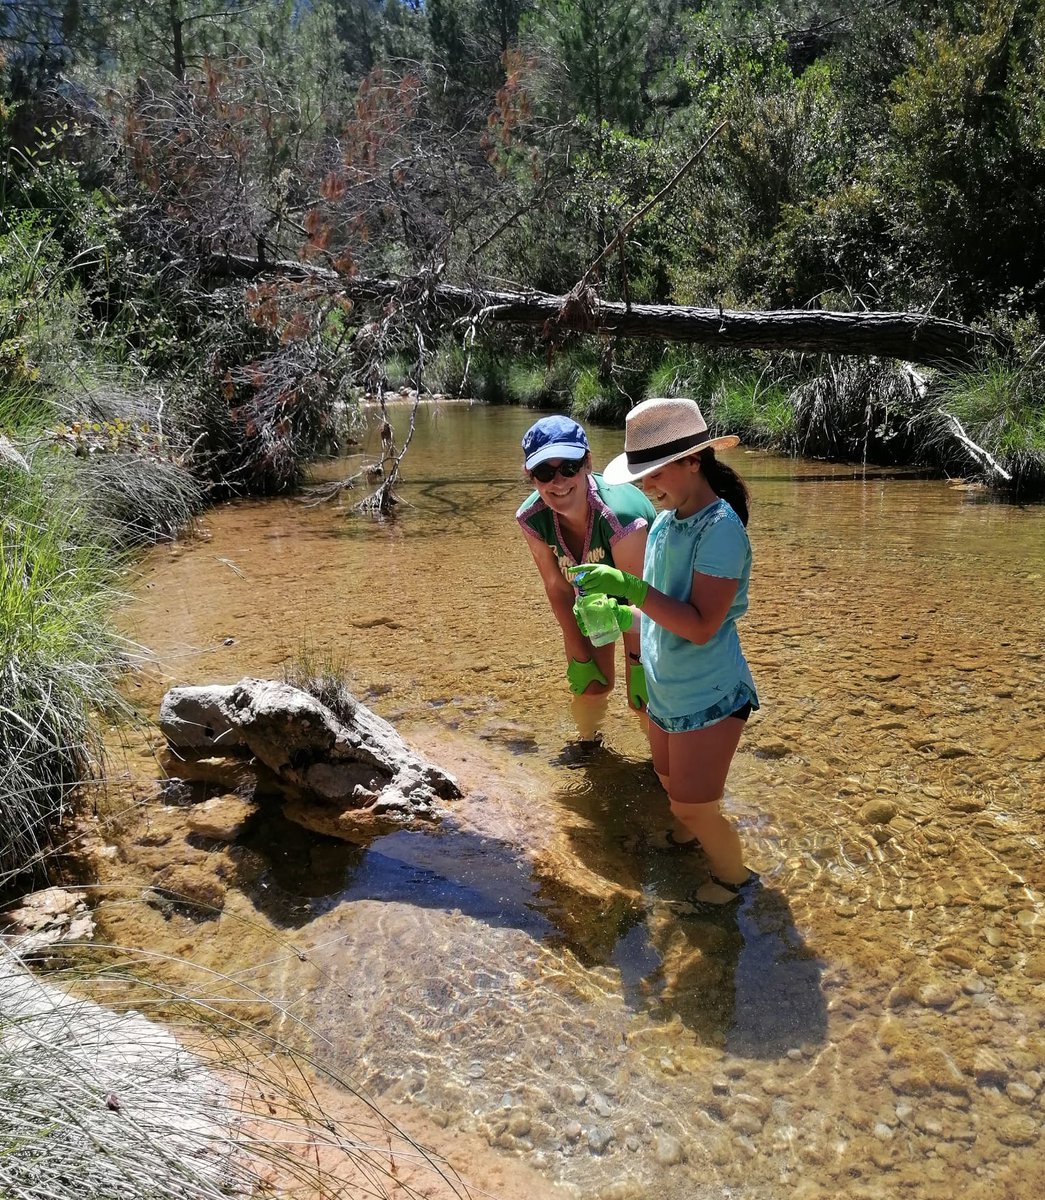 Today we sampled macroinvertebrates, water and sediments for eDNA, and collected the pitfall traps we placed last week for the project #BiodiversIRES @1000IRP. My little field assistant was brave!!! 💜 
#biodiversity #intermittentrivers #TerraAlta #Catalonia #parcnaturalElsPorts